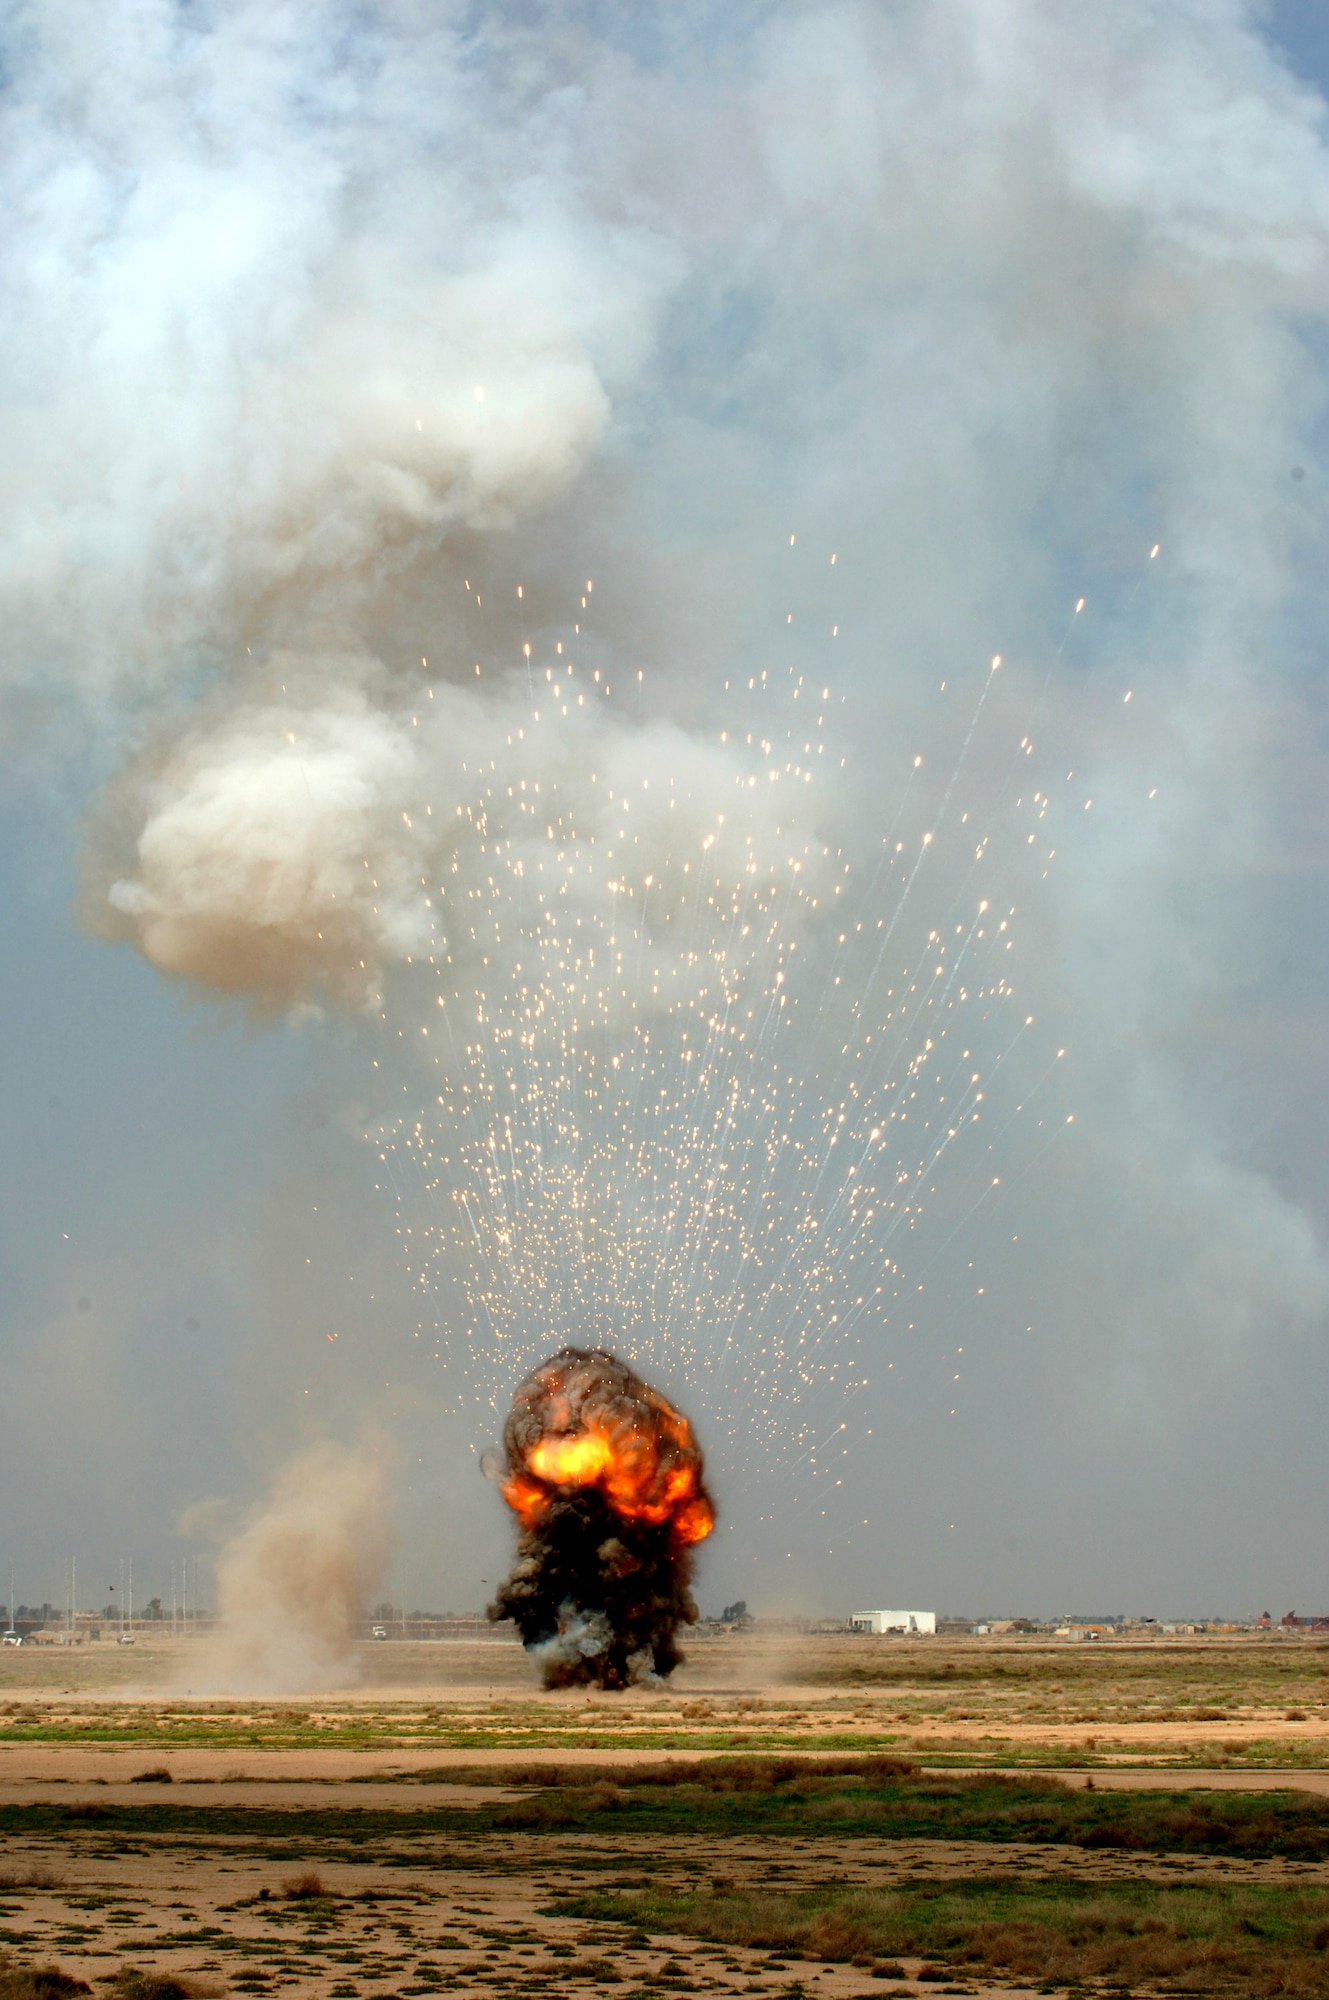 A controlled detonation is conducted by Airmen with the 332nd Expeditionary Civil Engineer Squadron's Explosive Ordnance Disposal Flight March 20 at Balad Air Base, Iraq. Balad EOD members periodically dispose of unserviceable, excess, or dangerous ordnance by fabricating explosive demolition charges in a controlled environment. (U. S. Air Force photo/Staff Sgt. Michael R. Holzworth)